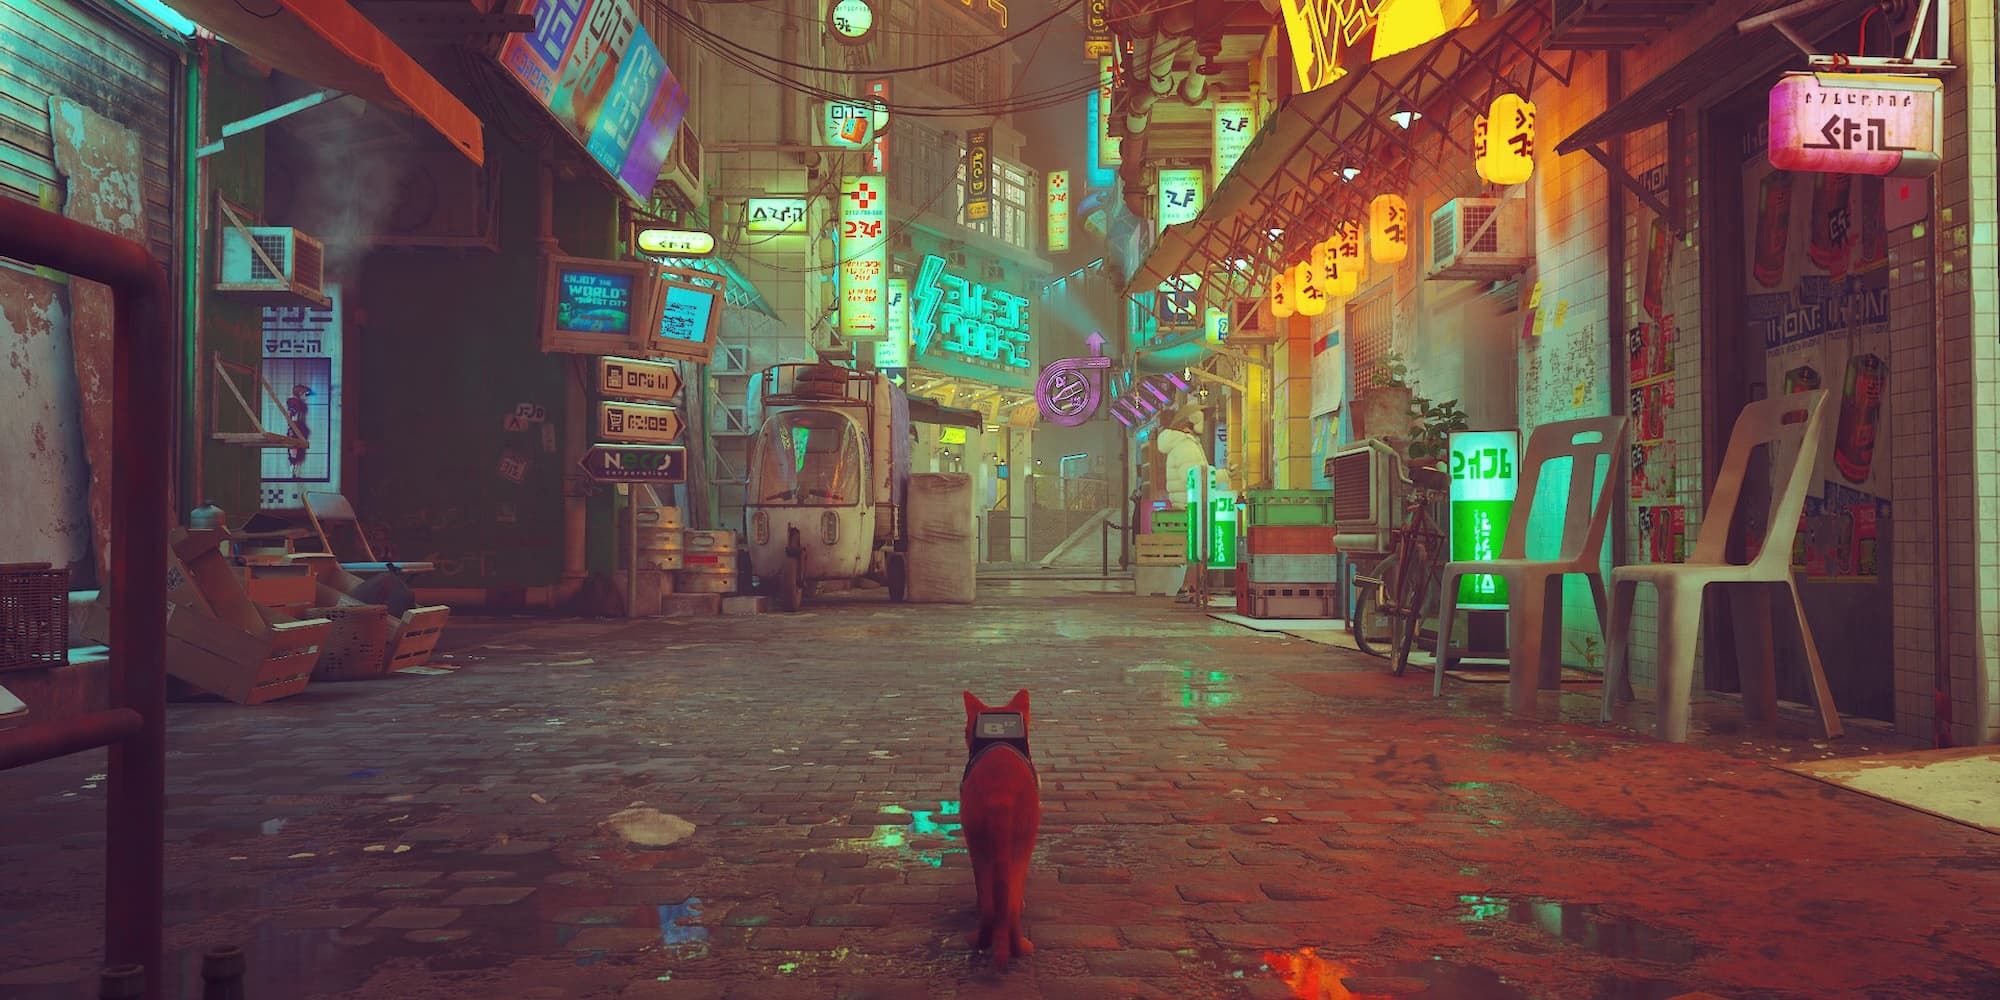 The cat in Stray walks down a side street lined with neon signs.